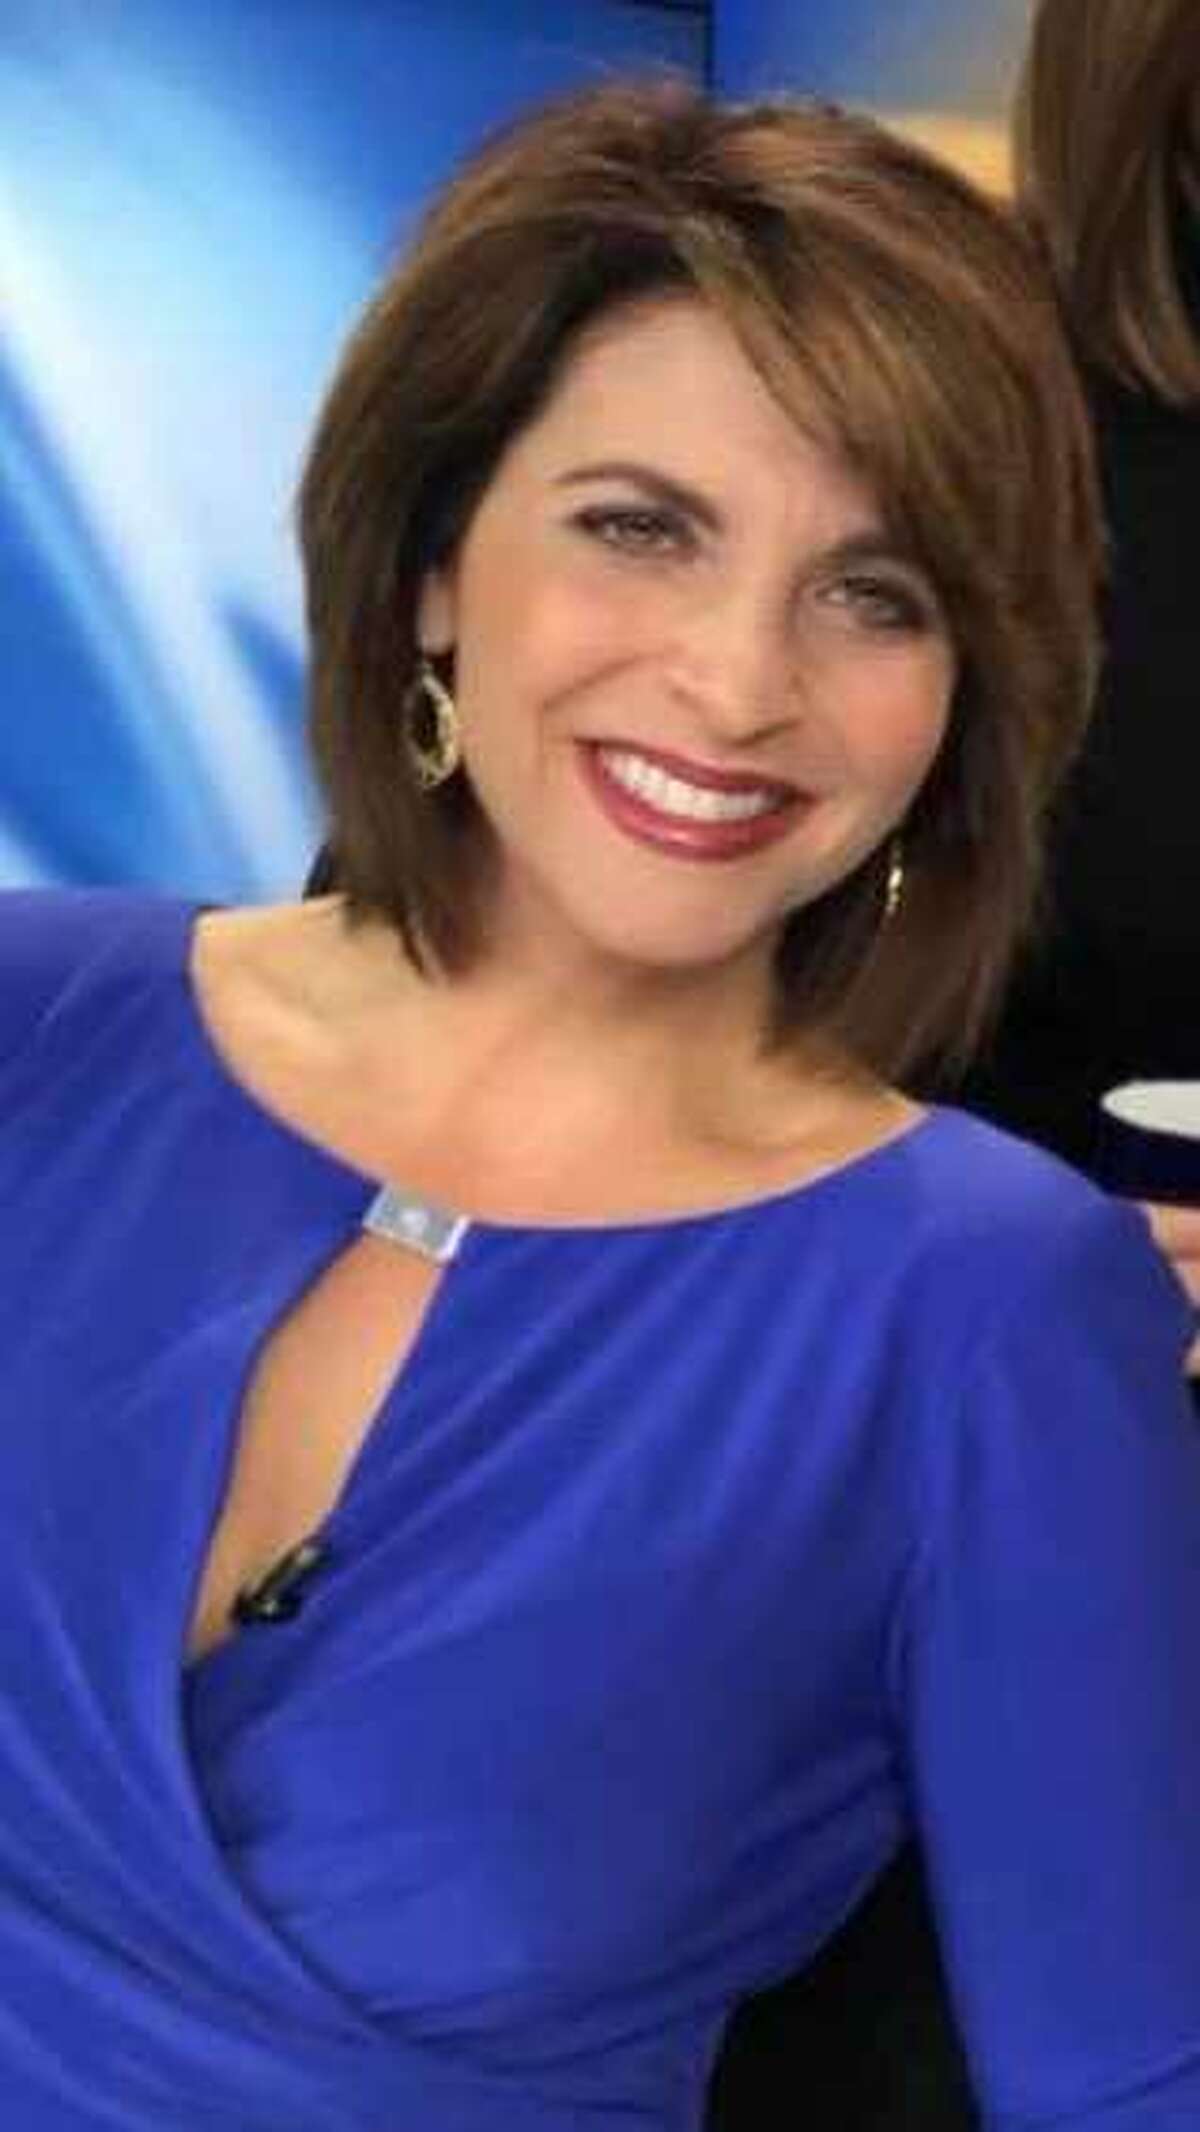 Click through the slideshow to learn 20 things you don't know about Christina Arangio, co-anchor on News10 ABC weekday mornings.